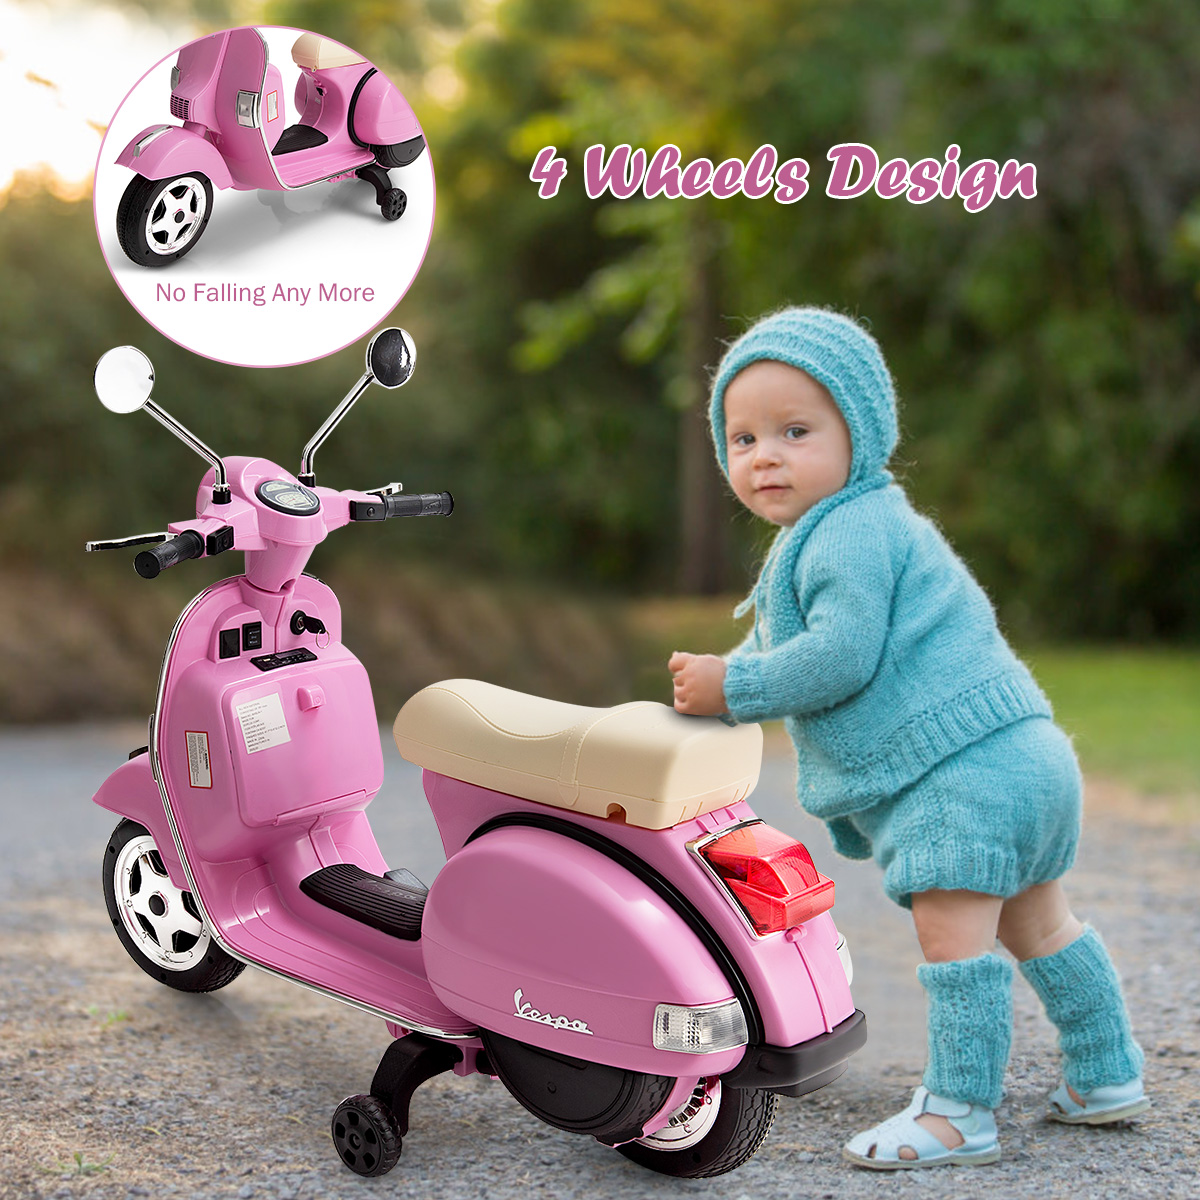 Costway Kids Vespa Scooter, 6V Rechargeable Ride on Motorcycle w/Training Wheels Pink - image 5 of 9